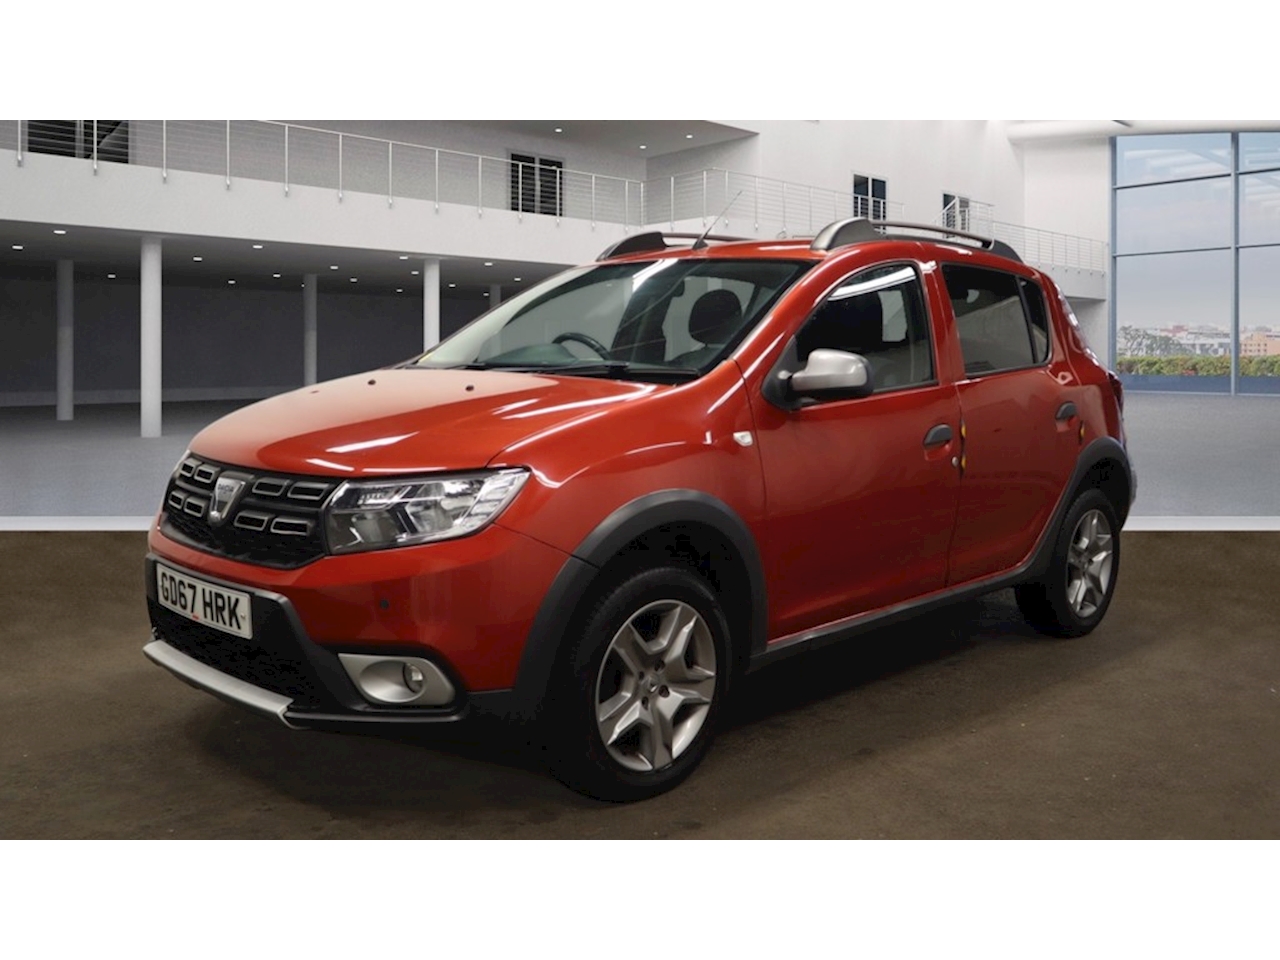 DACIA SANDERO STEPWAY dacia-sandero-stepway-2018 Used - the parking